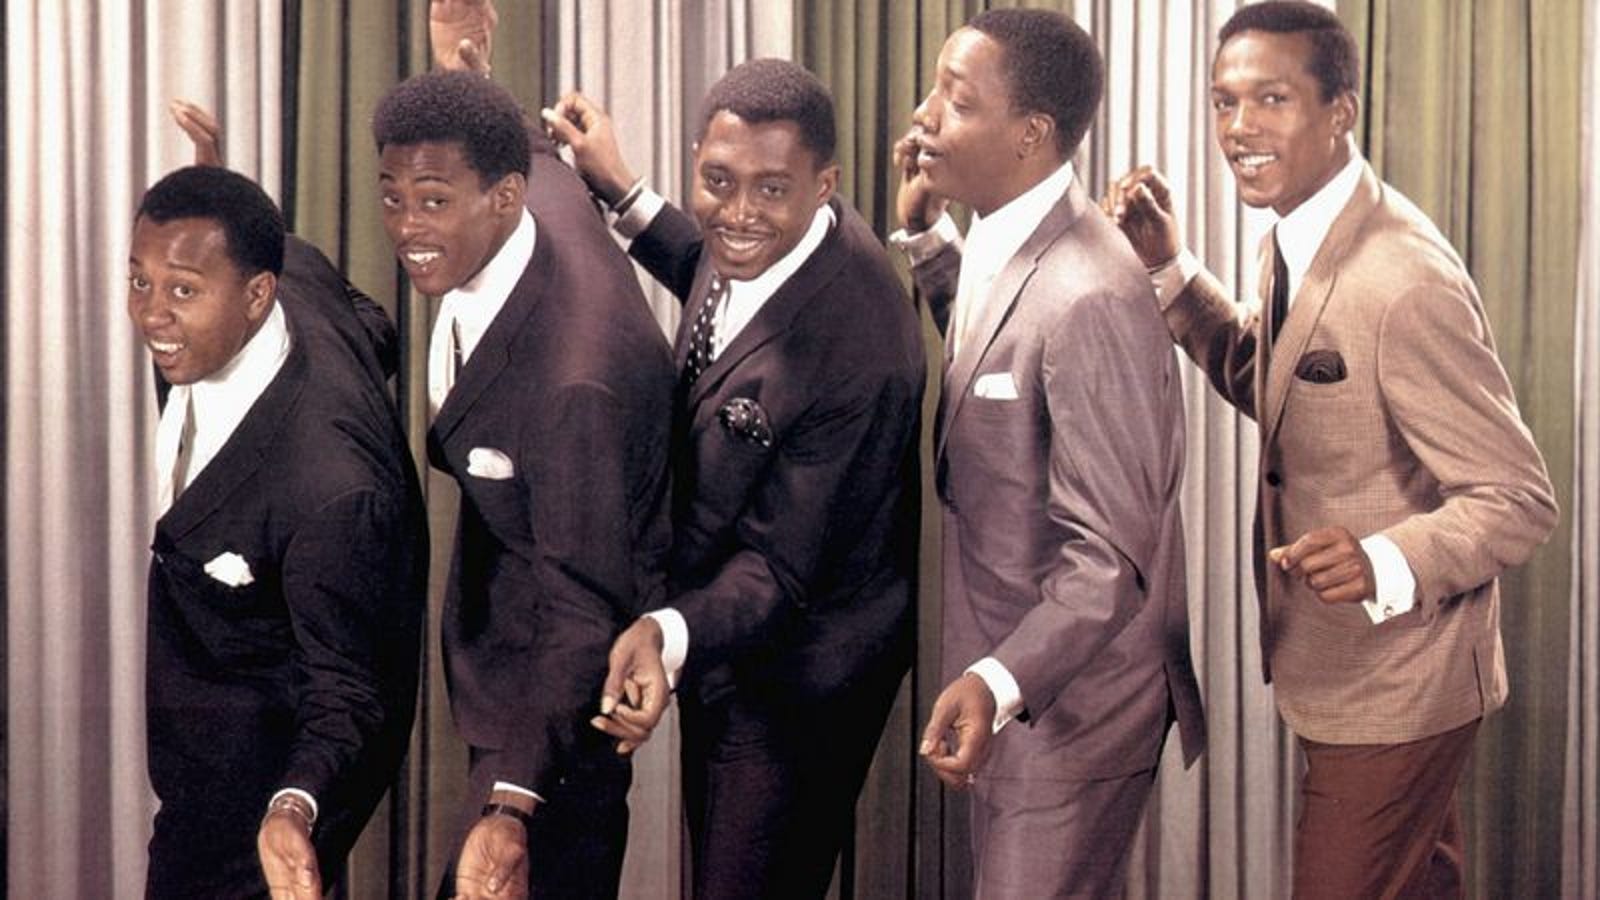 A guide to the music of Motown